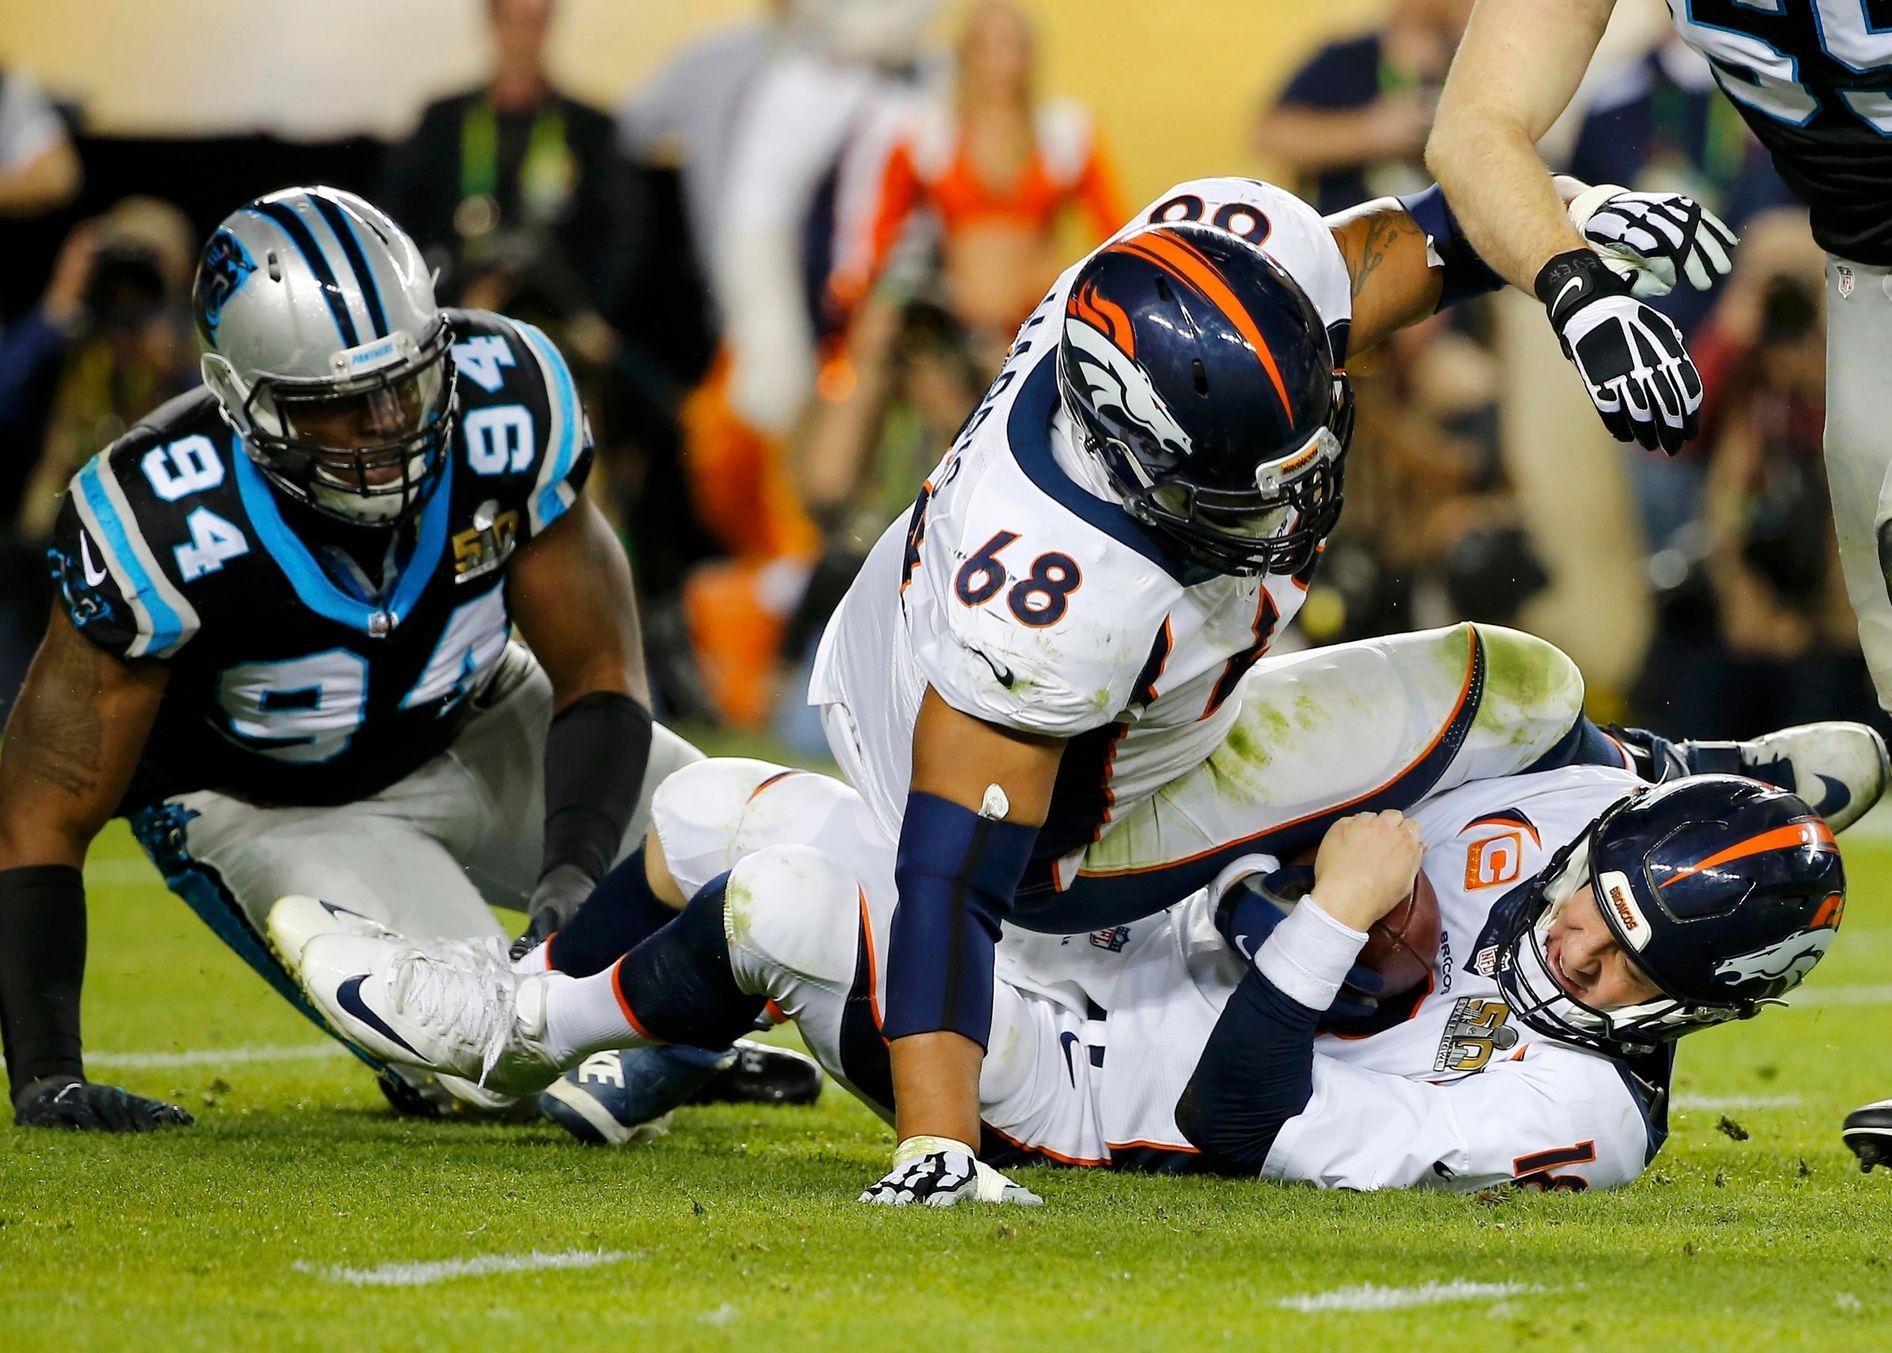 Denver Broncos' quarterback Manning is sacked by Carolina Panthers' Ealy as Broncos' Harris falls on Manning in the third quarter during the NFL's Super Bowl 50 football game in Santa Clara